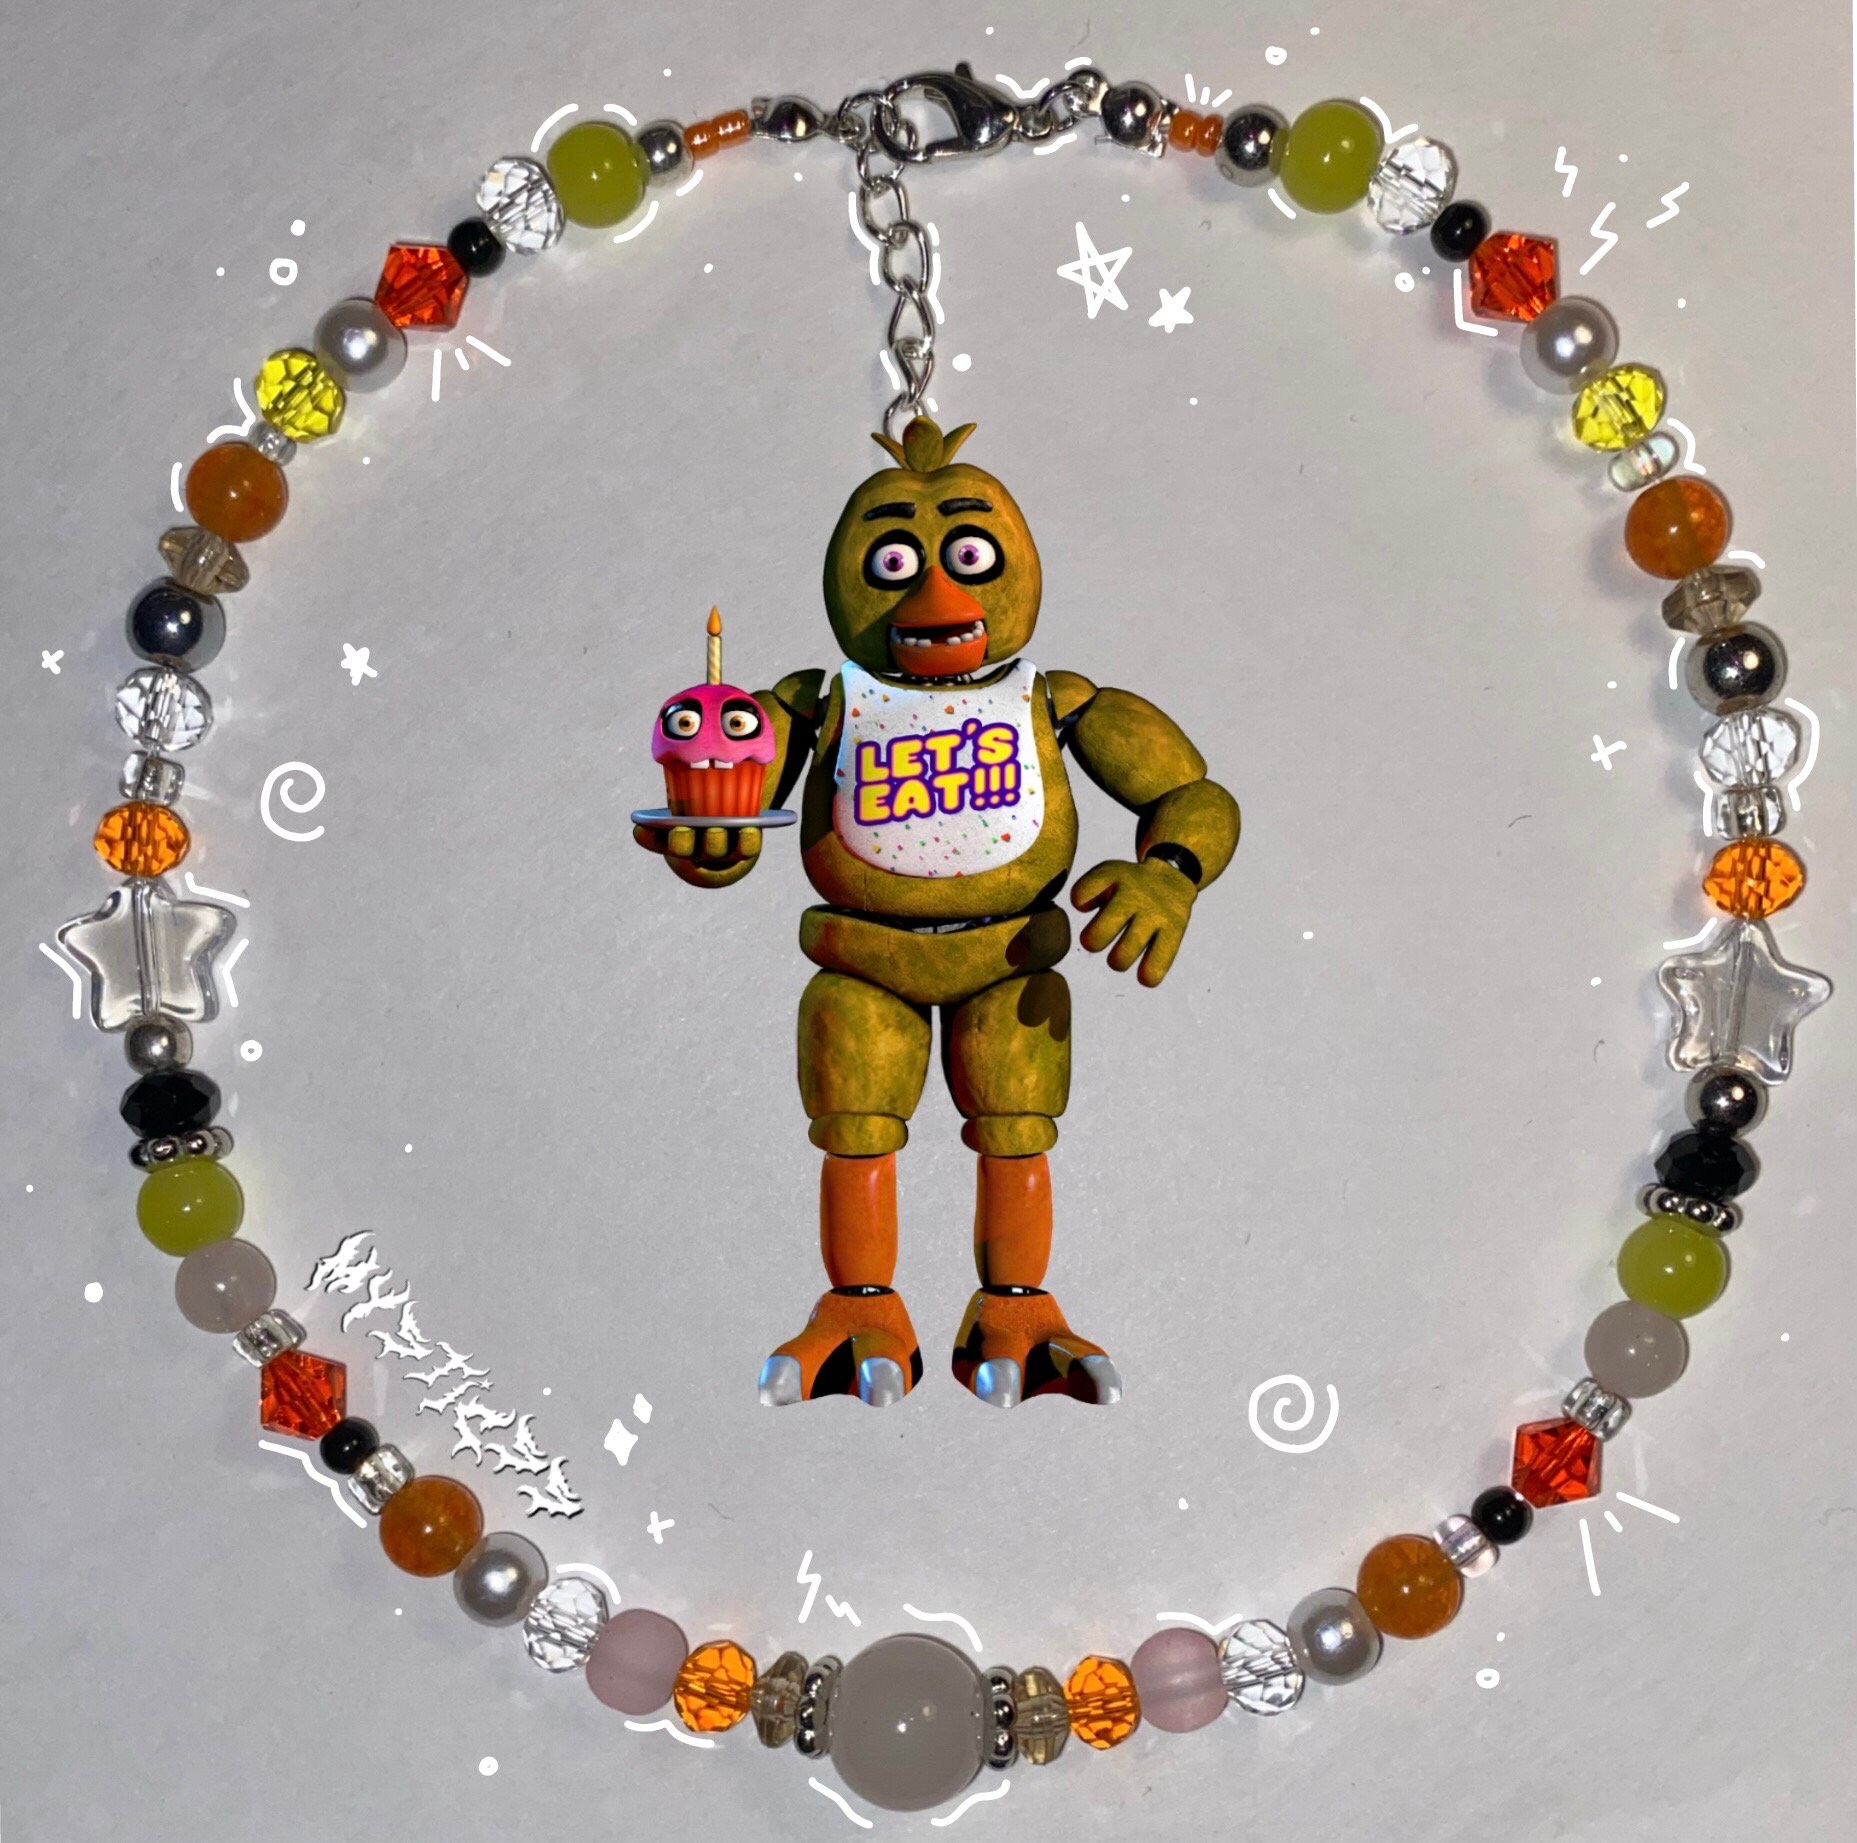 Five Nights Necklace 